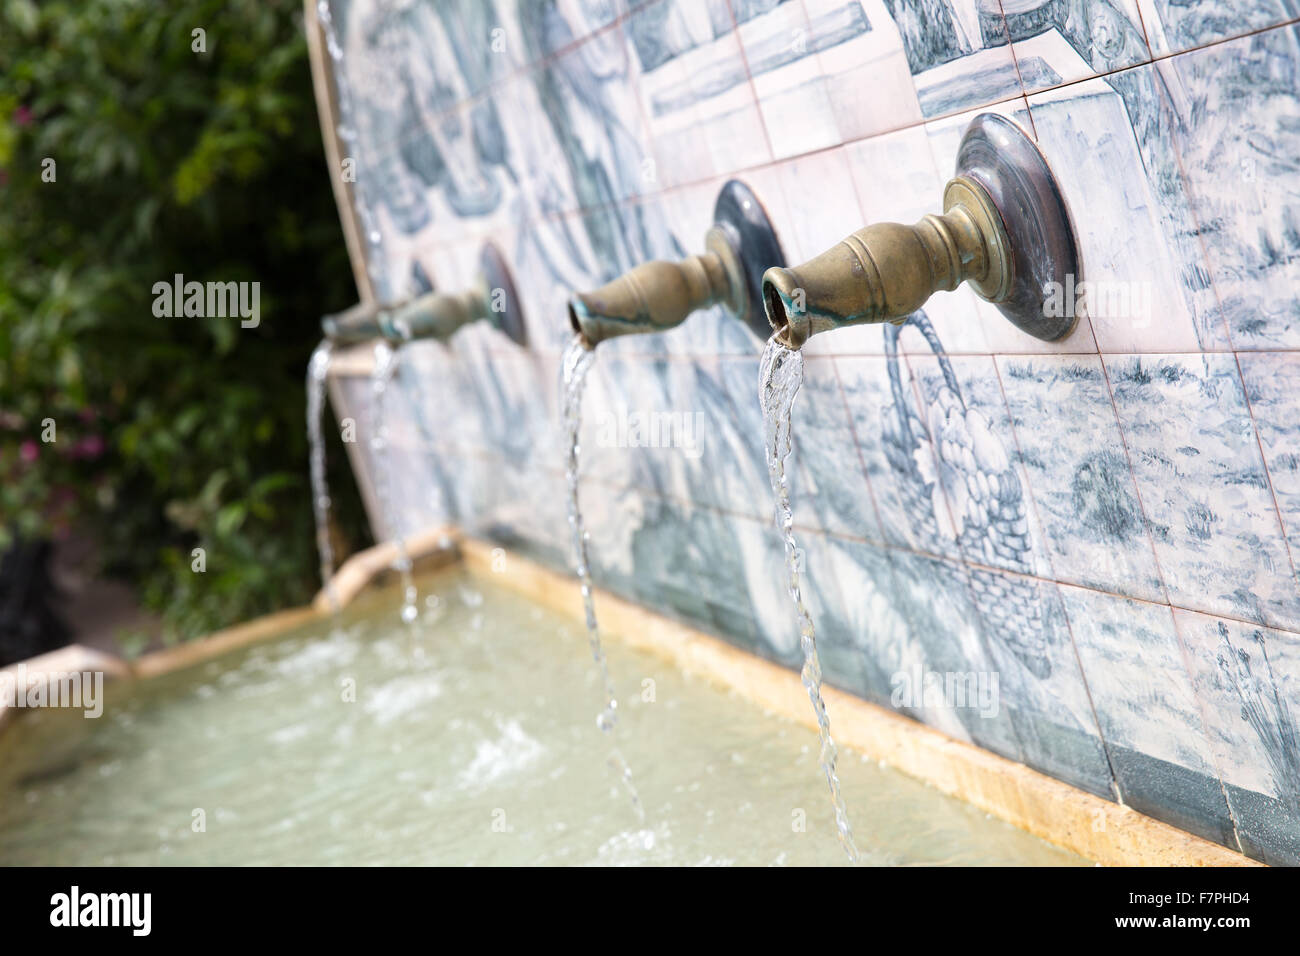 Streams of water coming out of some metal pipes in a village fountain with handmade ceramic drawings Stock Photo